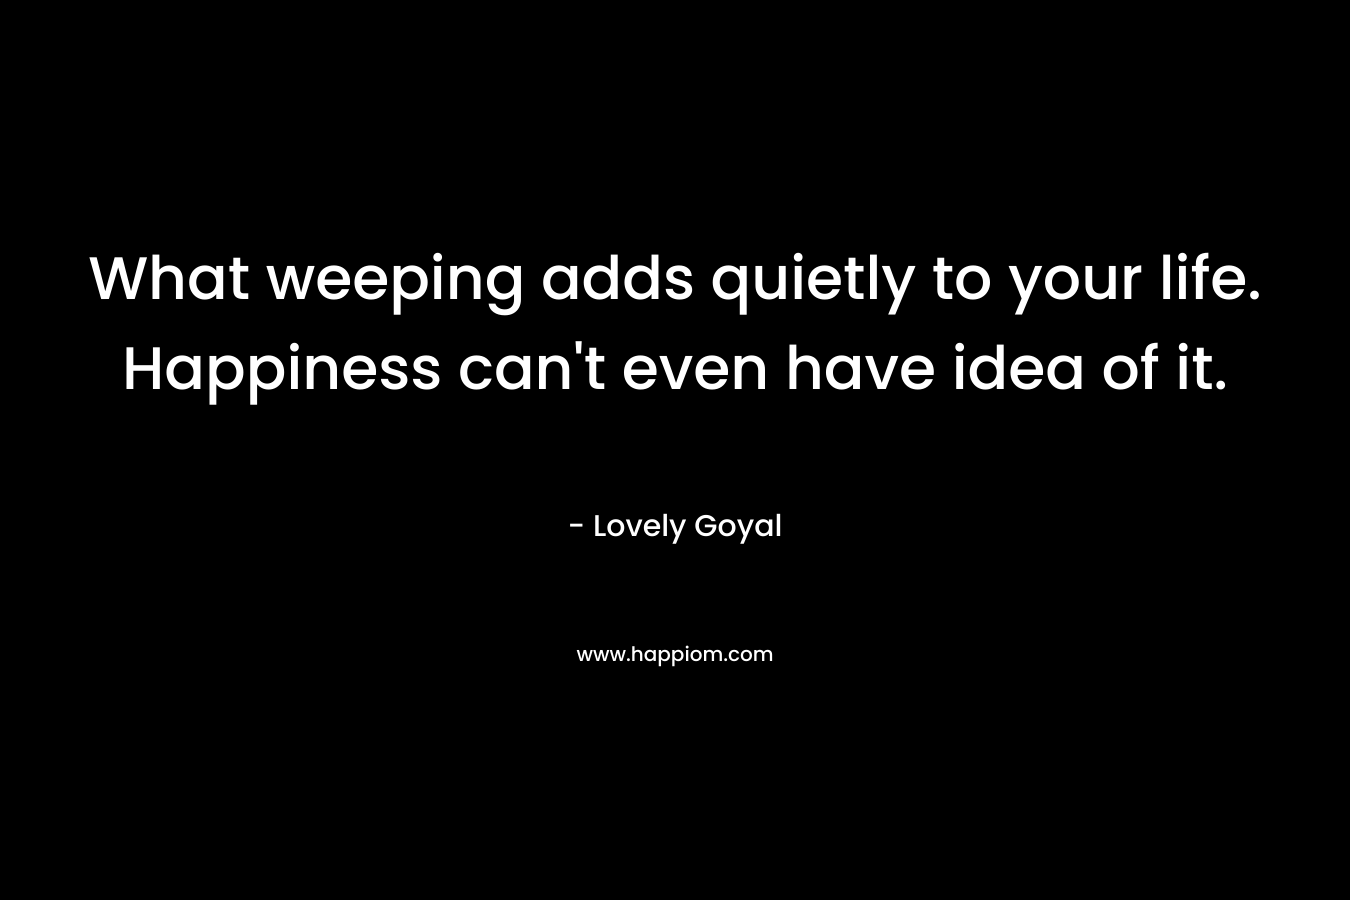 What weeping adds quietly to your life. Happiness can’t even have idea of it. – Lovely Goyal